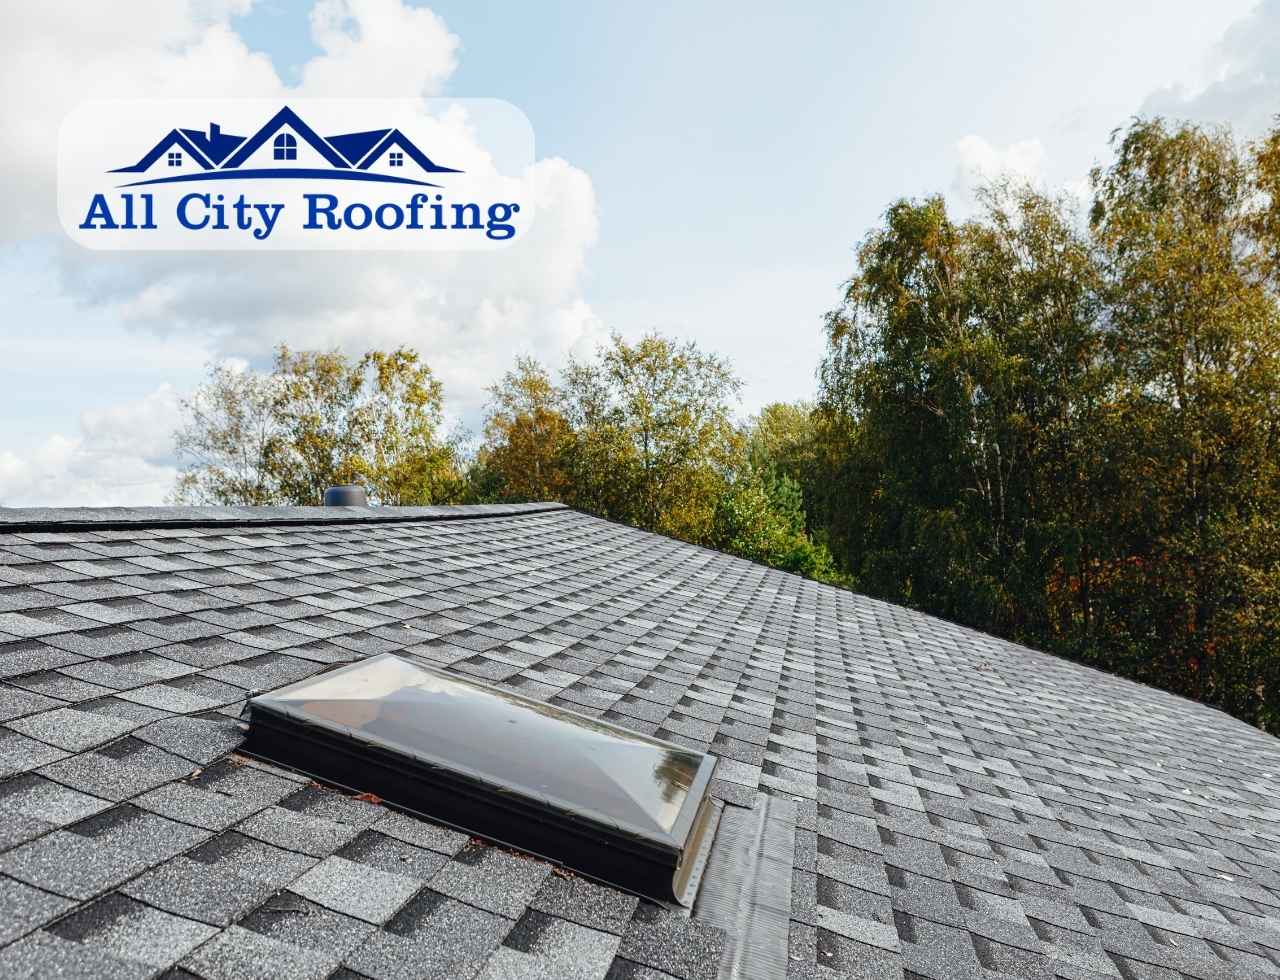 get professional solutions, contact All City Roofing